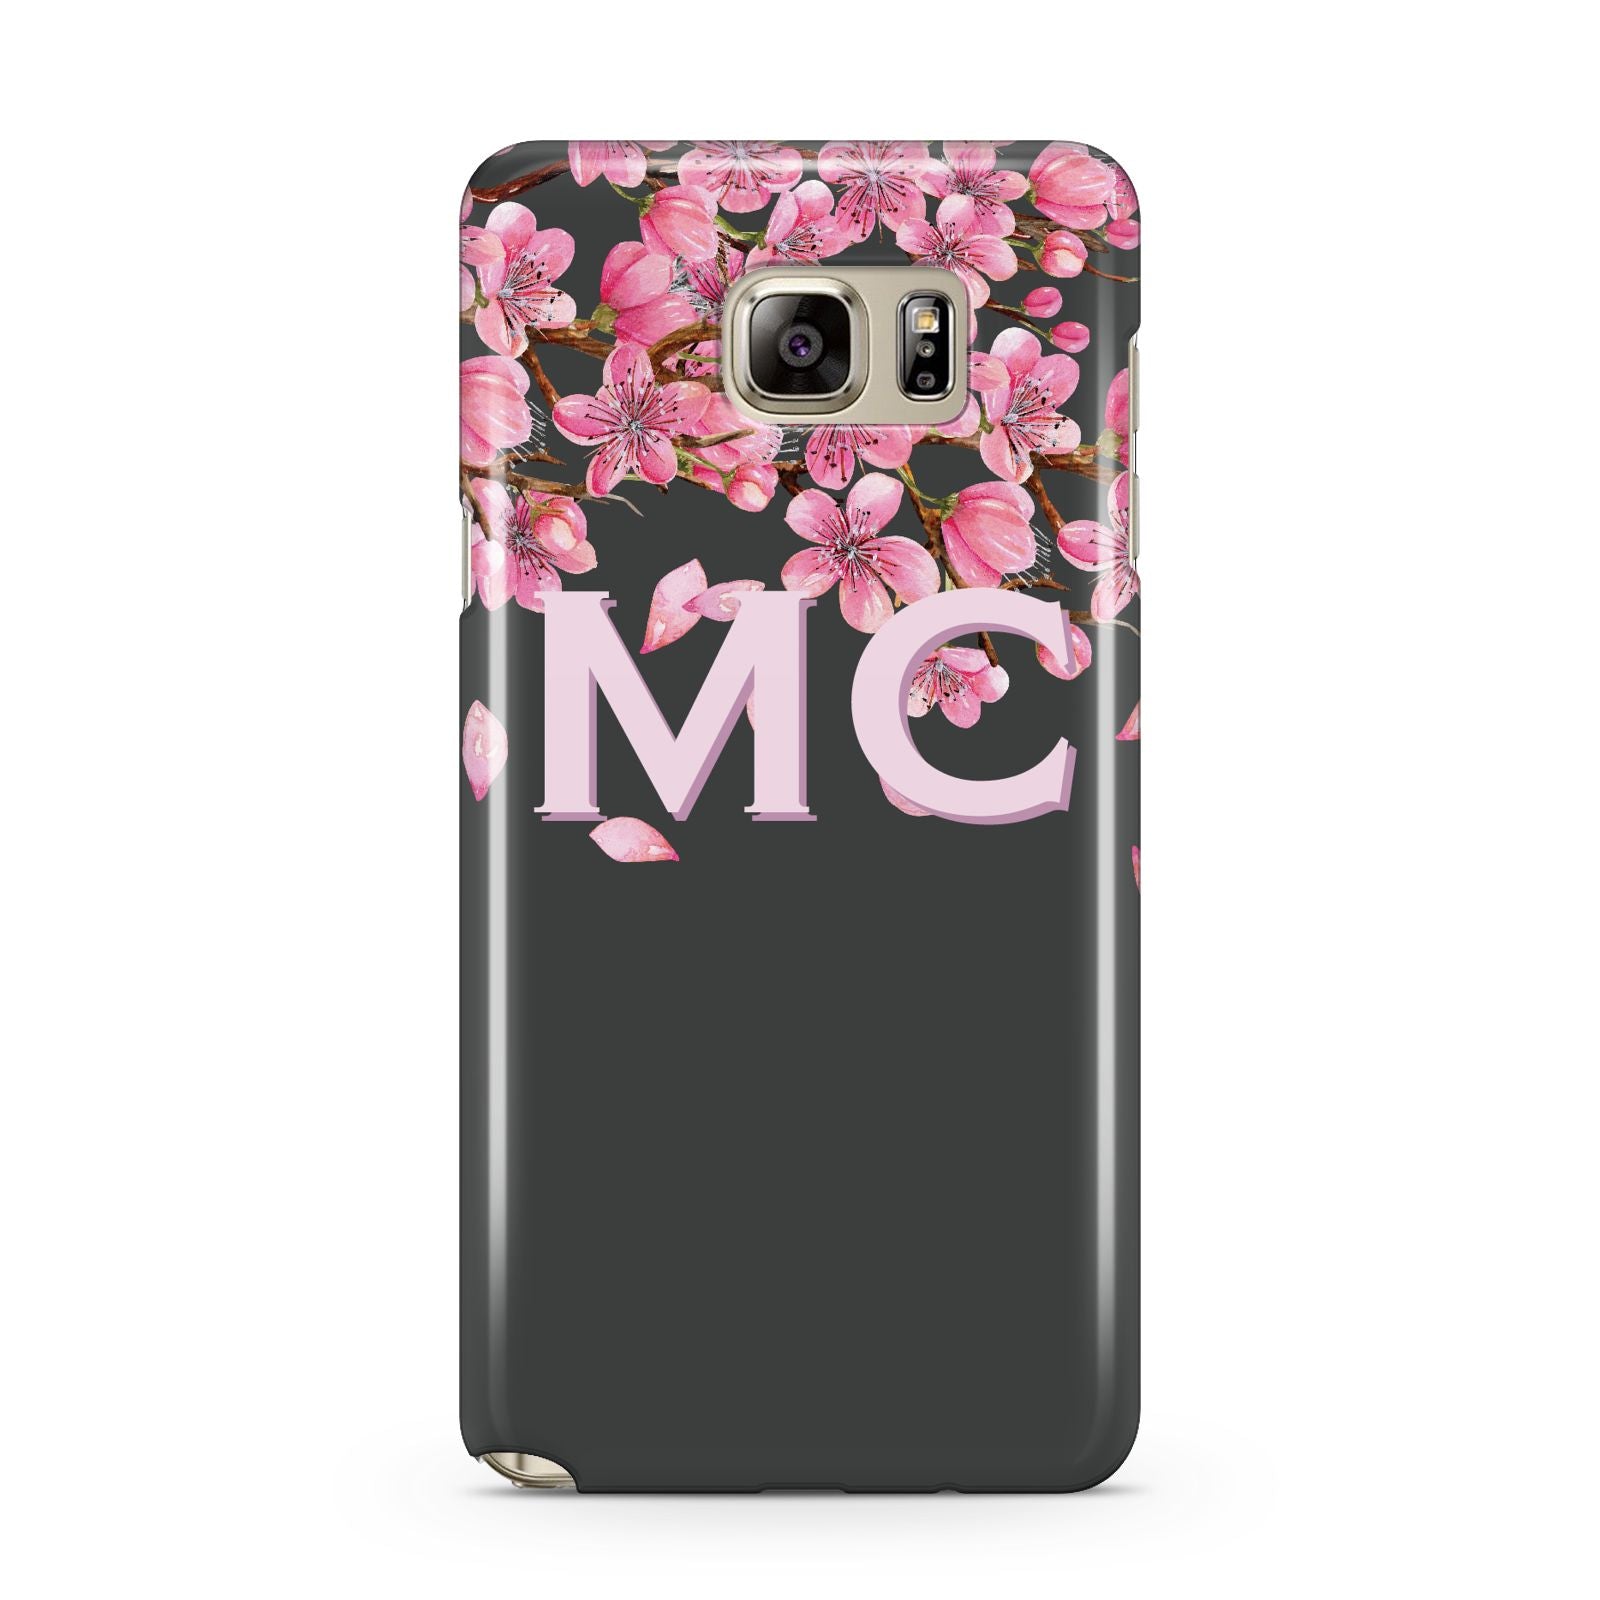 Personalised Floral Blossom Black Pink Samsung Galaxy Note 5 Case